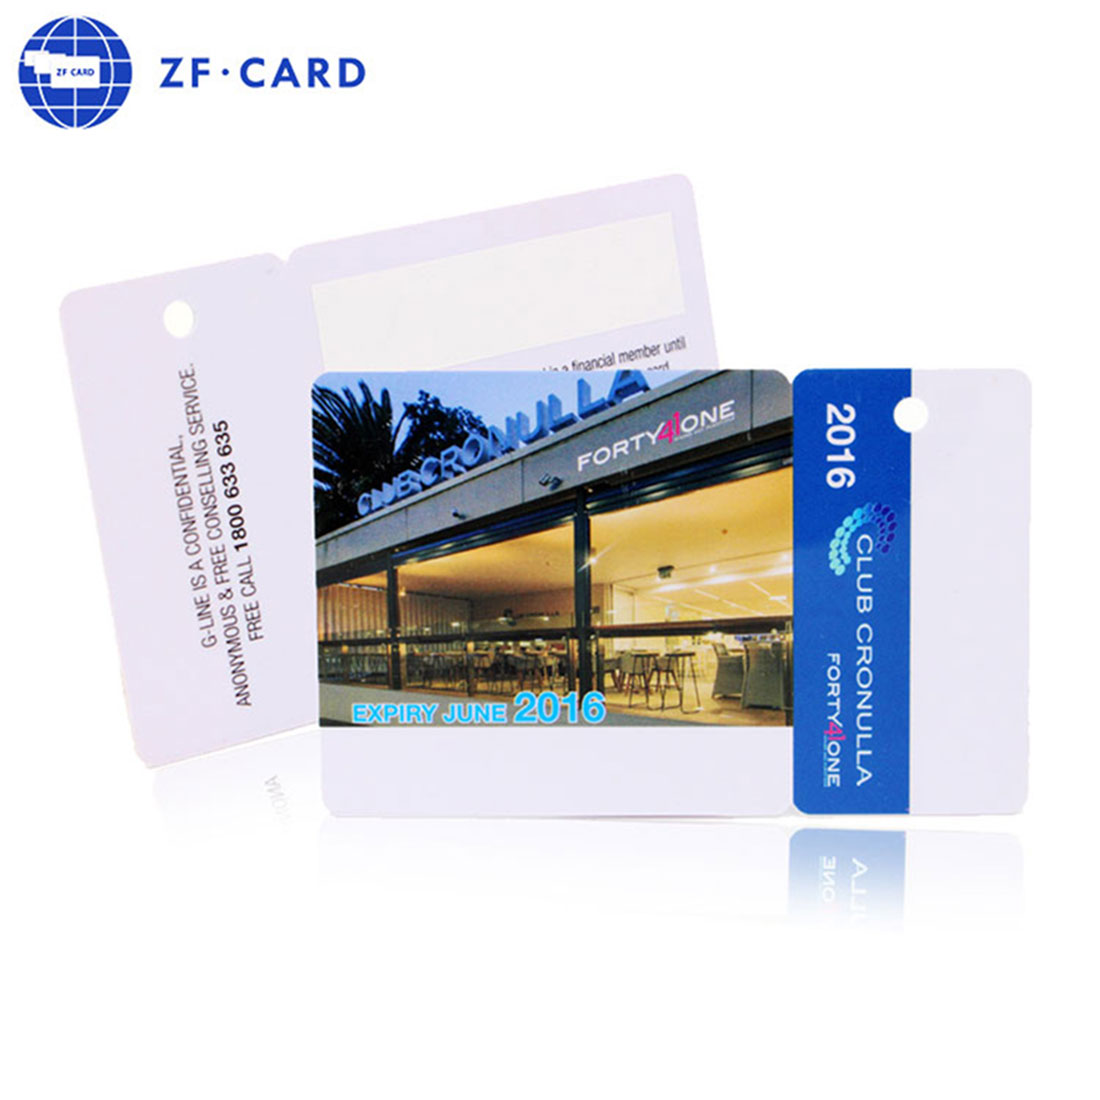 Hotel Door Lock Passive RFID Smart Card 13.56MHz ISO14443A Chip Key Card